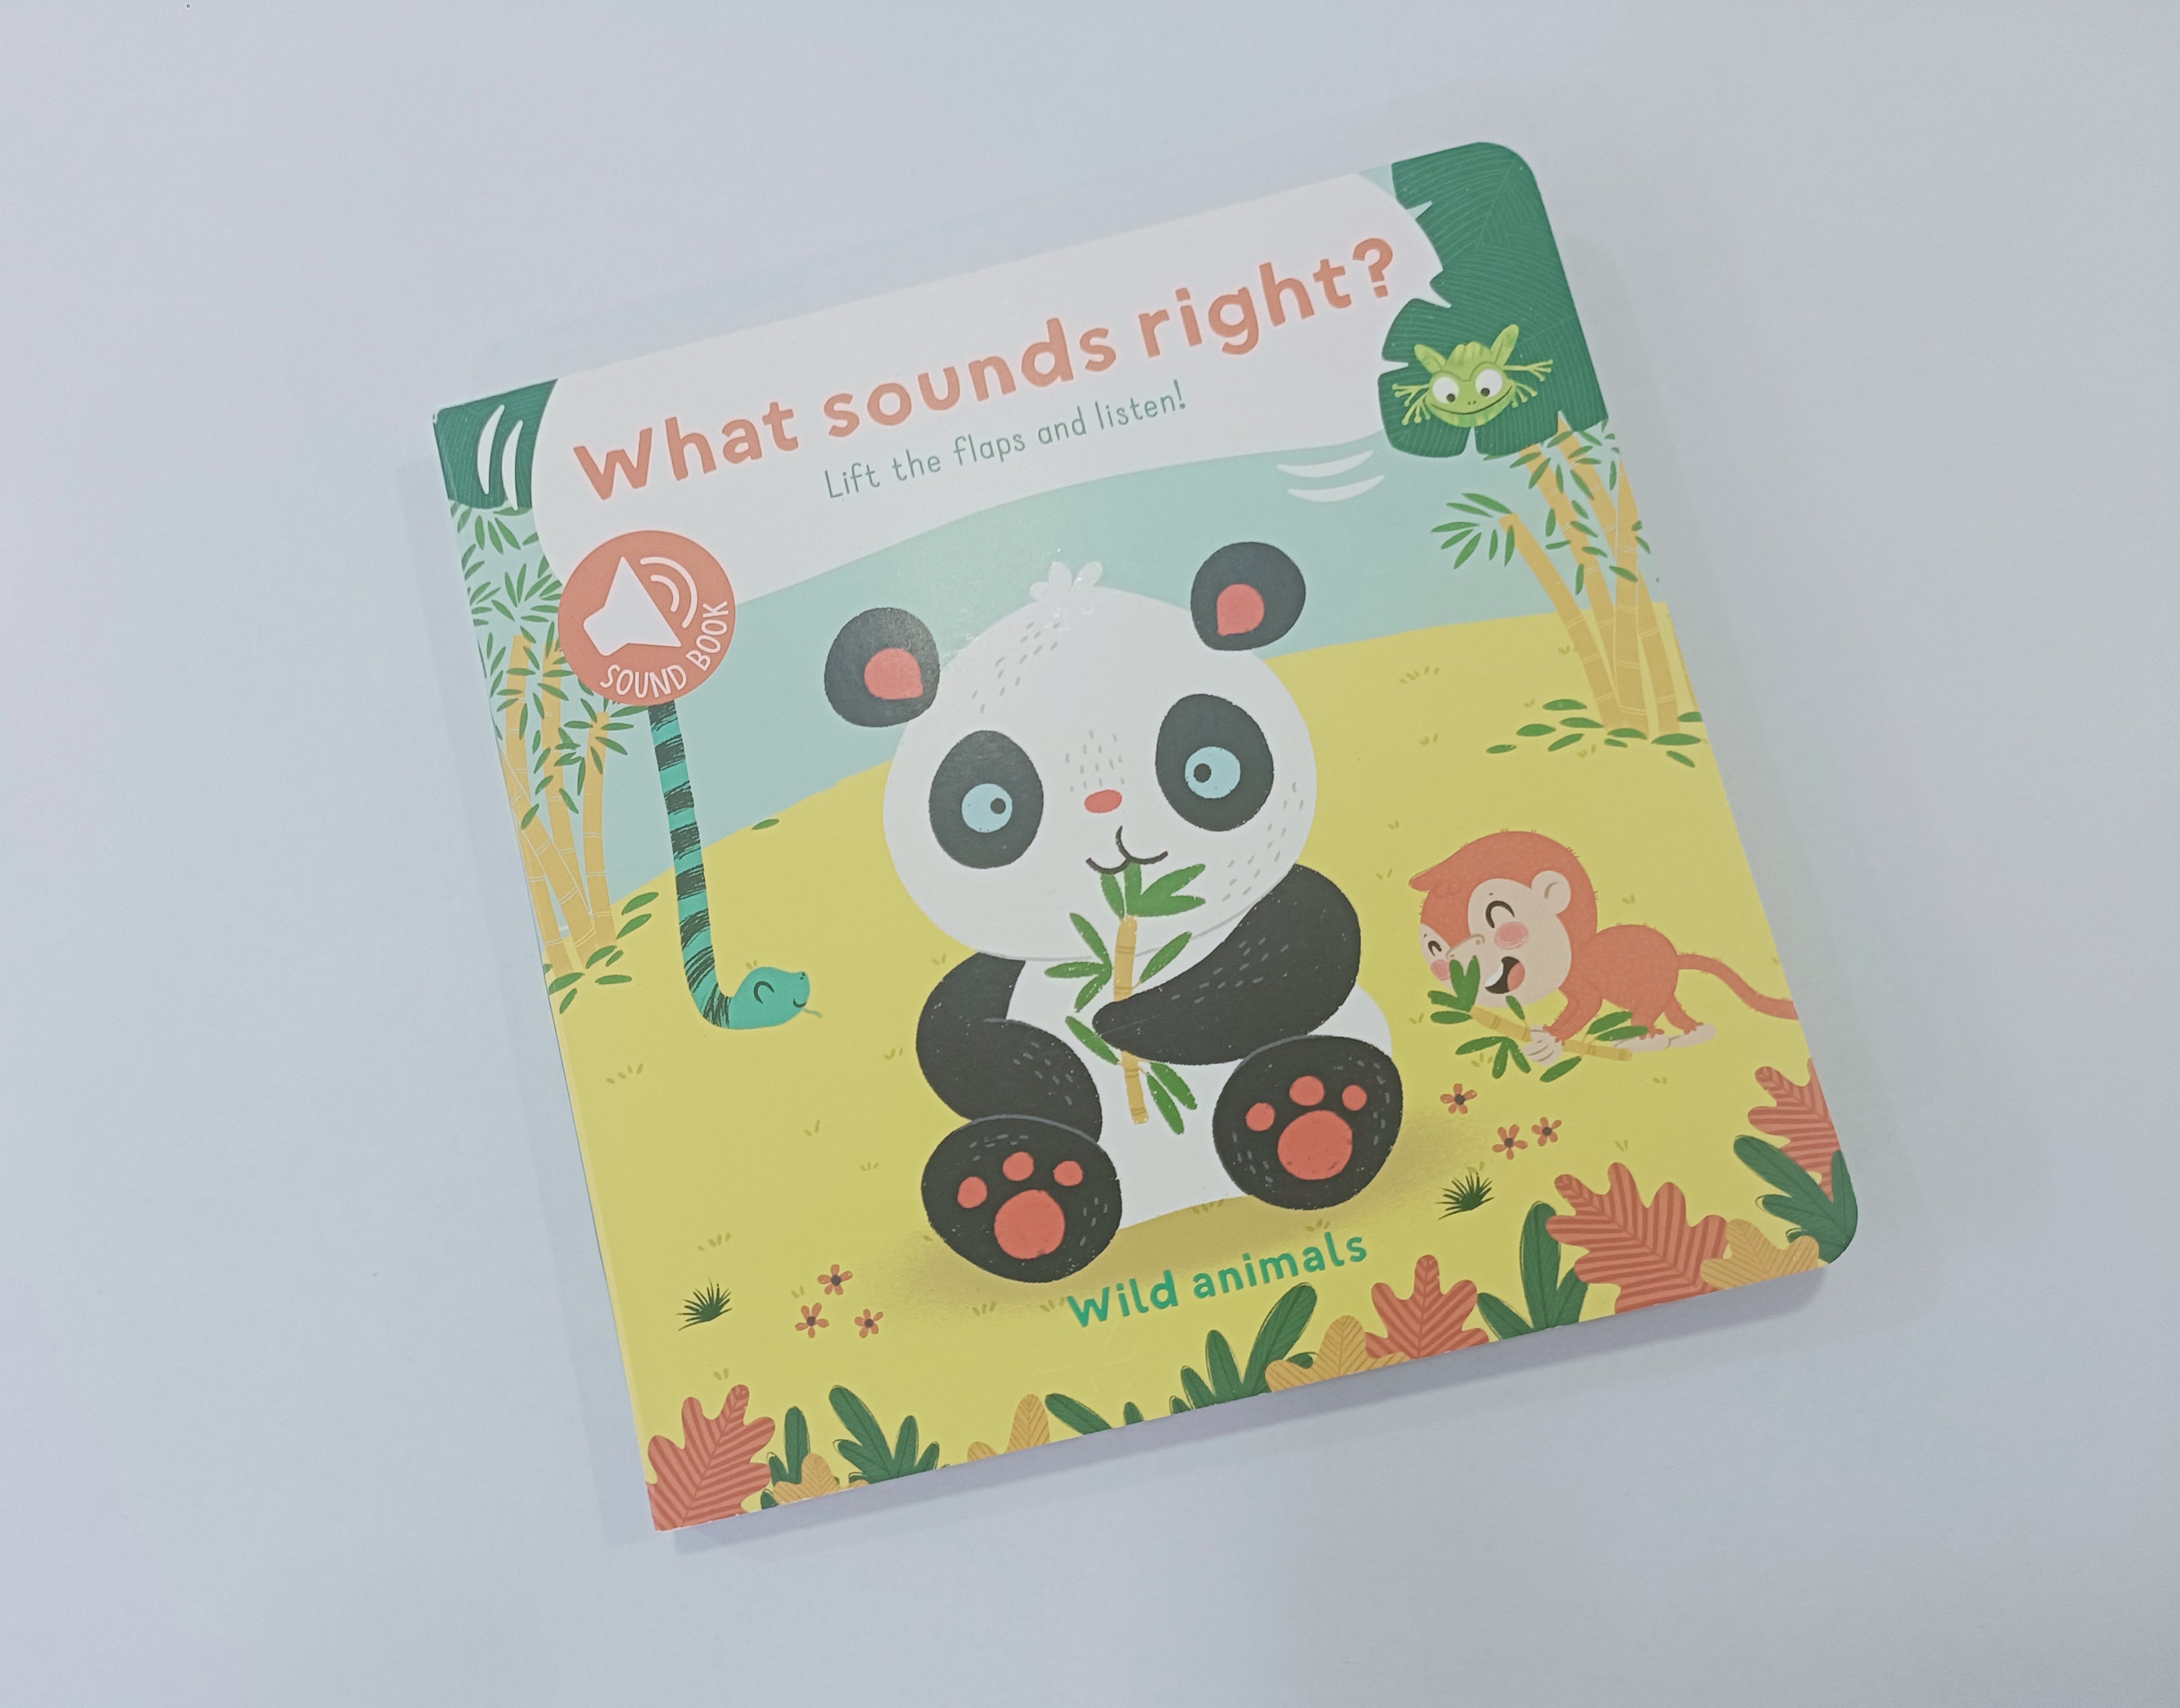 What Sounds Right? Lift the flap and listen! wild animals